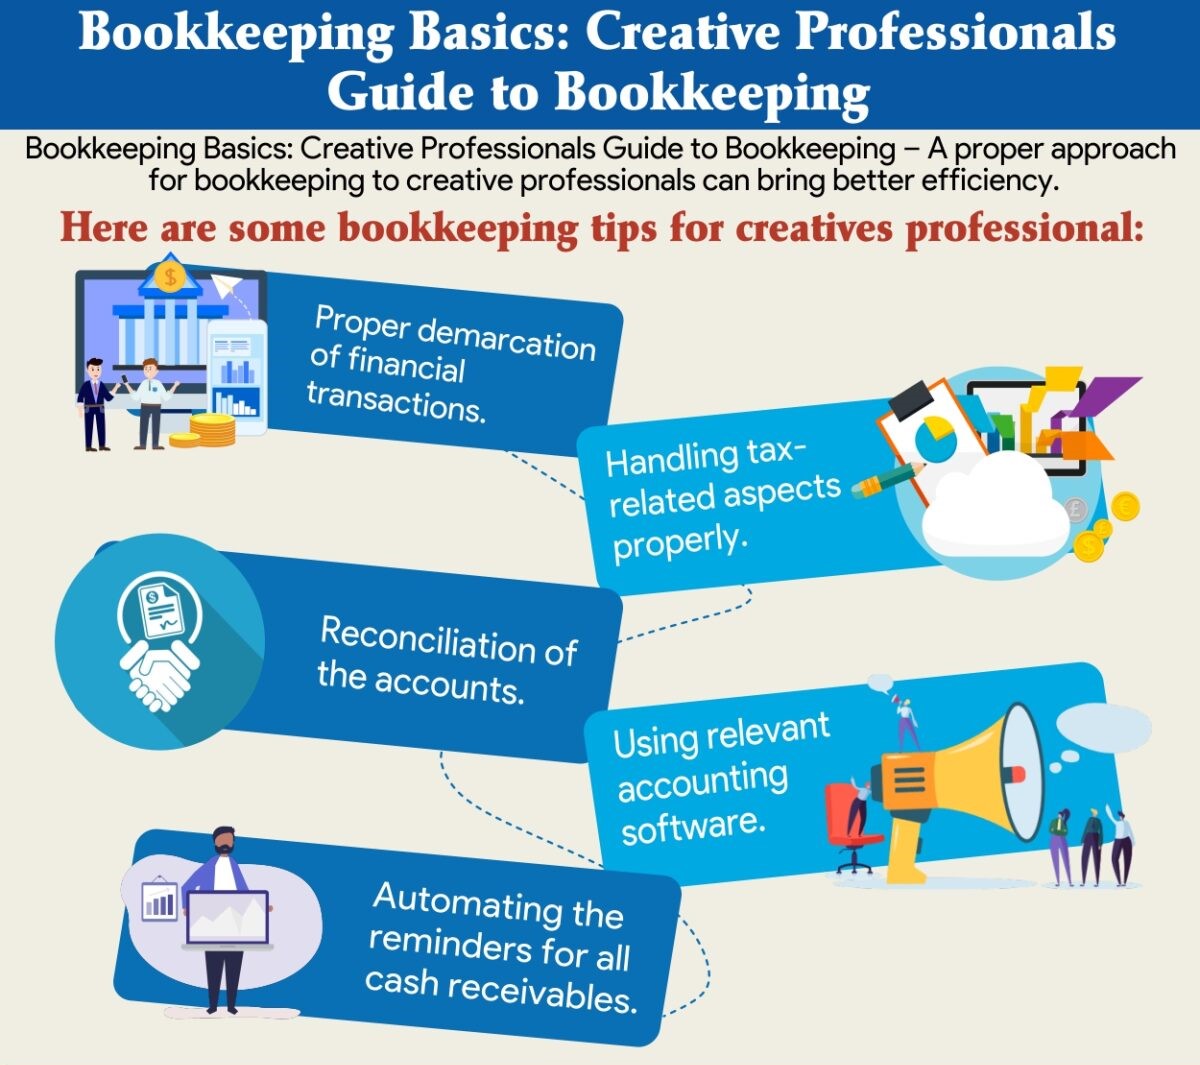 Guide to Bookkeeping